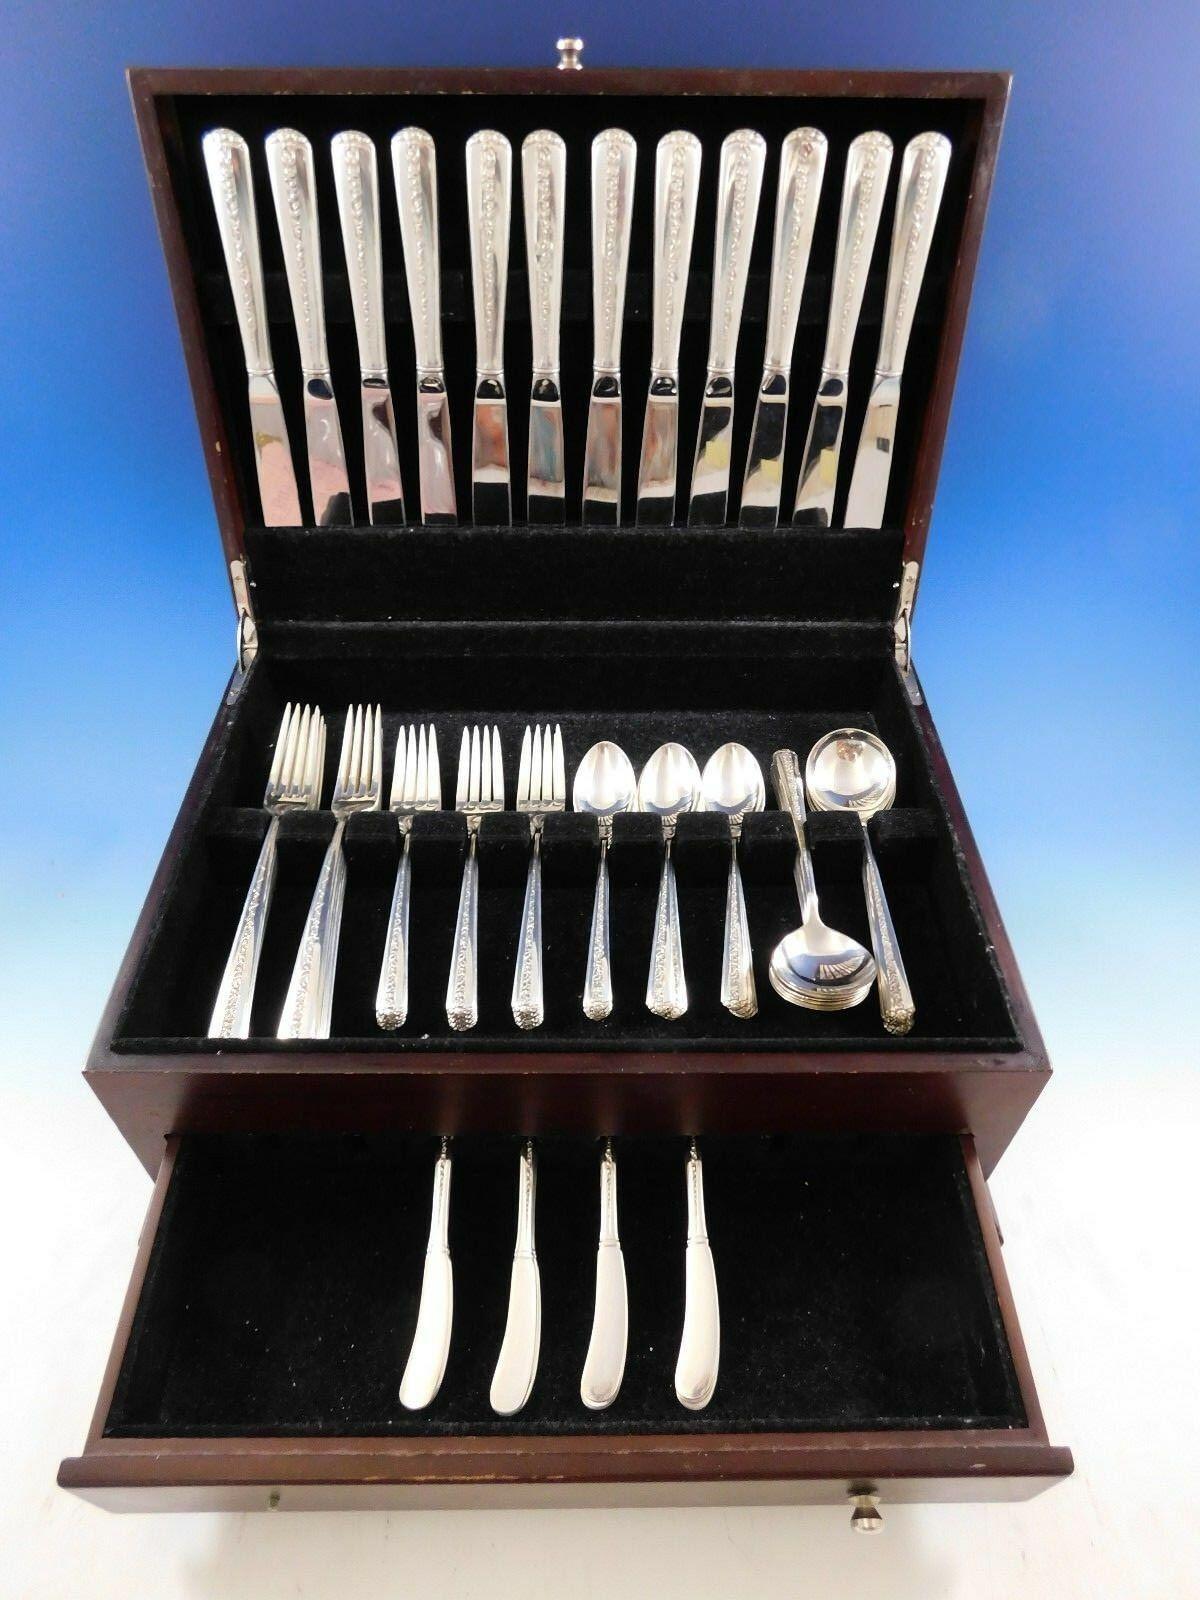 Highly polished sides with a trellis of rambling roses down the center and on the handle best describes the popular Rambler Rose pattern, first introduced by Towle in 1937.

Dinner size Rambler Rose by Towle sterling silver flatware set, 72 pieces.